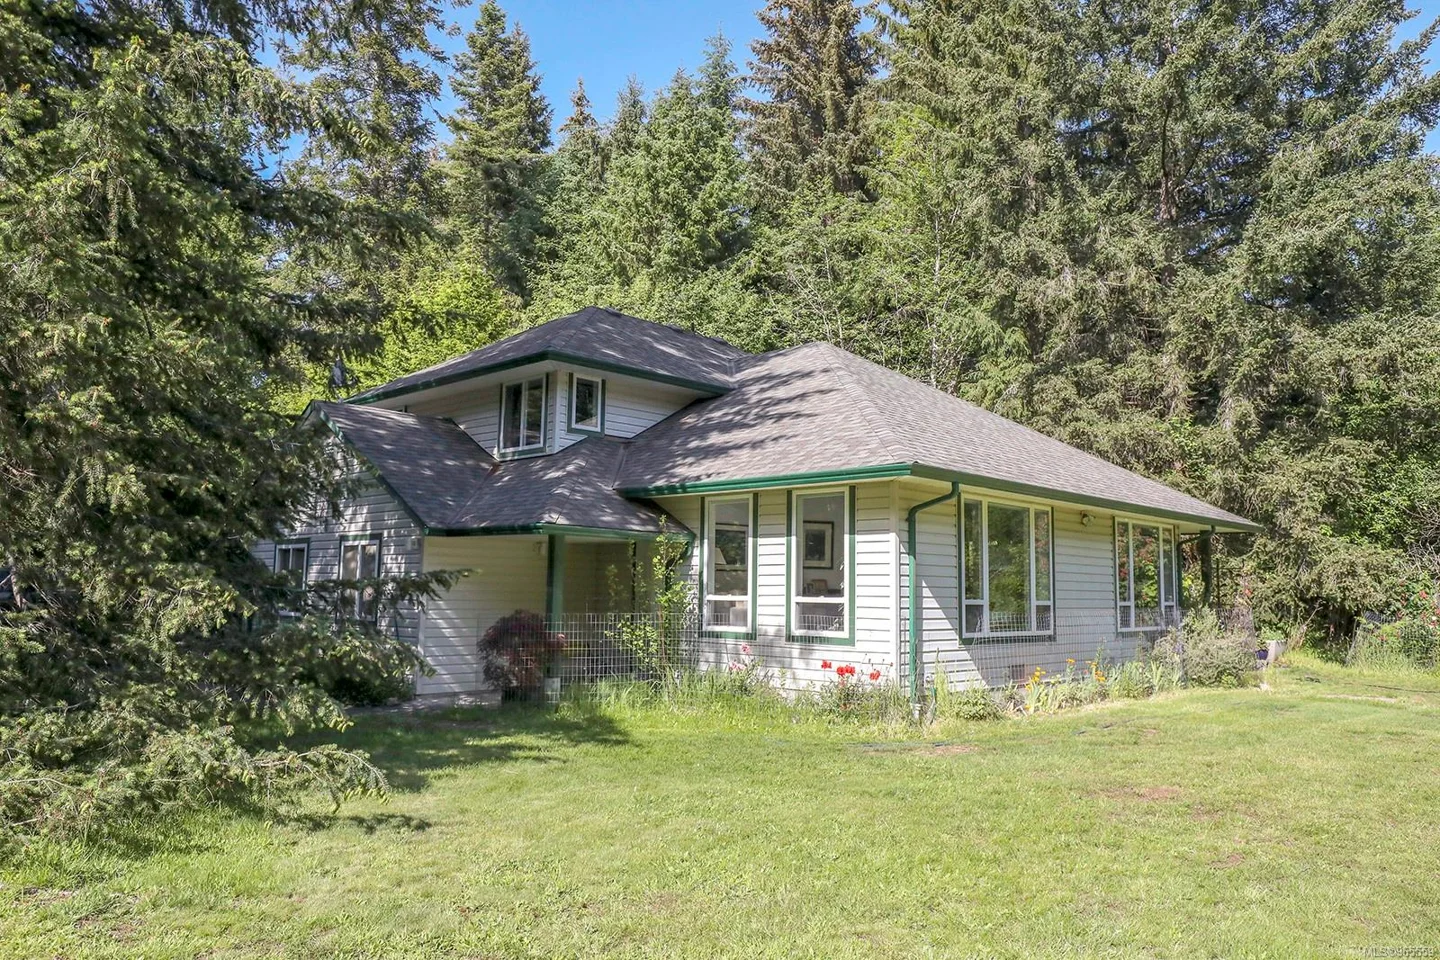 6 acres with a cozy home, an idyllic yard and a big garden!